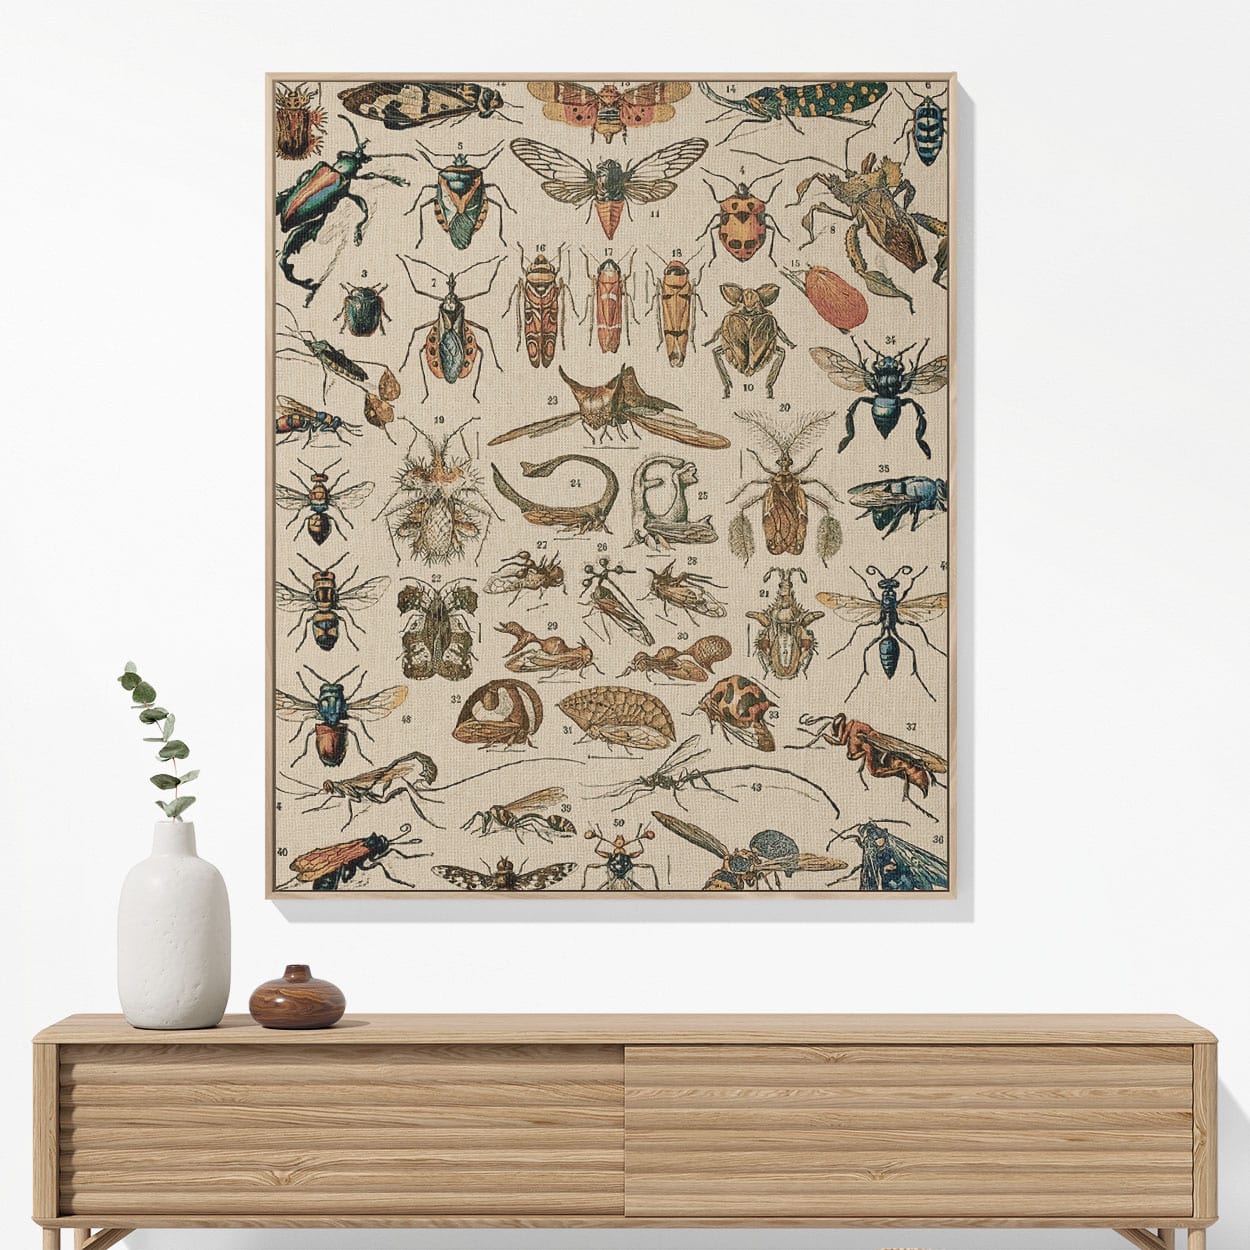 Bugs and Insects Woven Blanket Woven Blanket Hanging on a Wall as Framed Wall Art